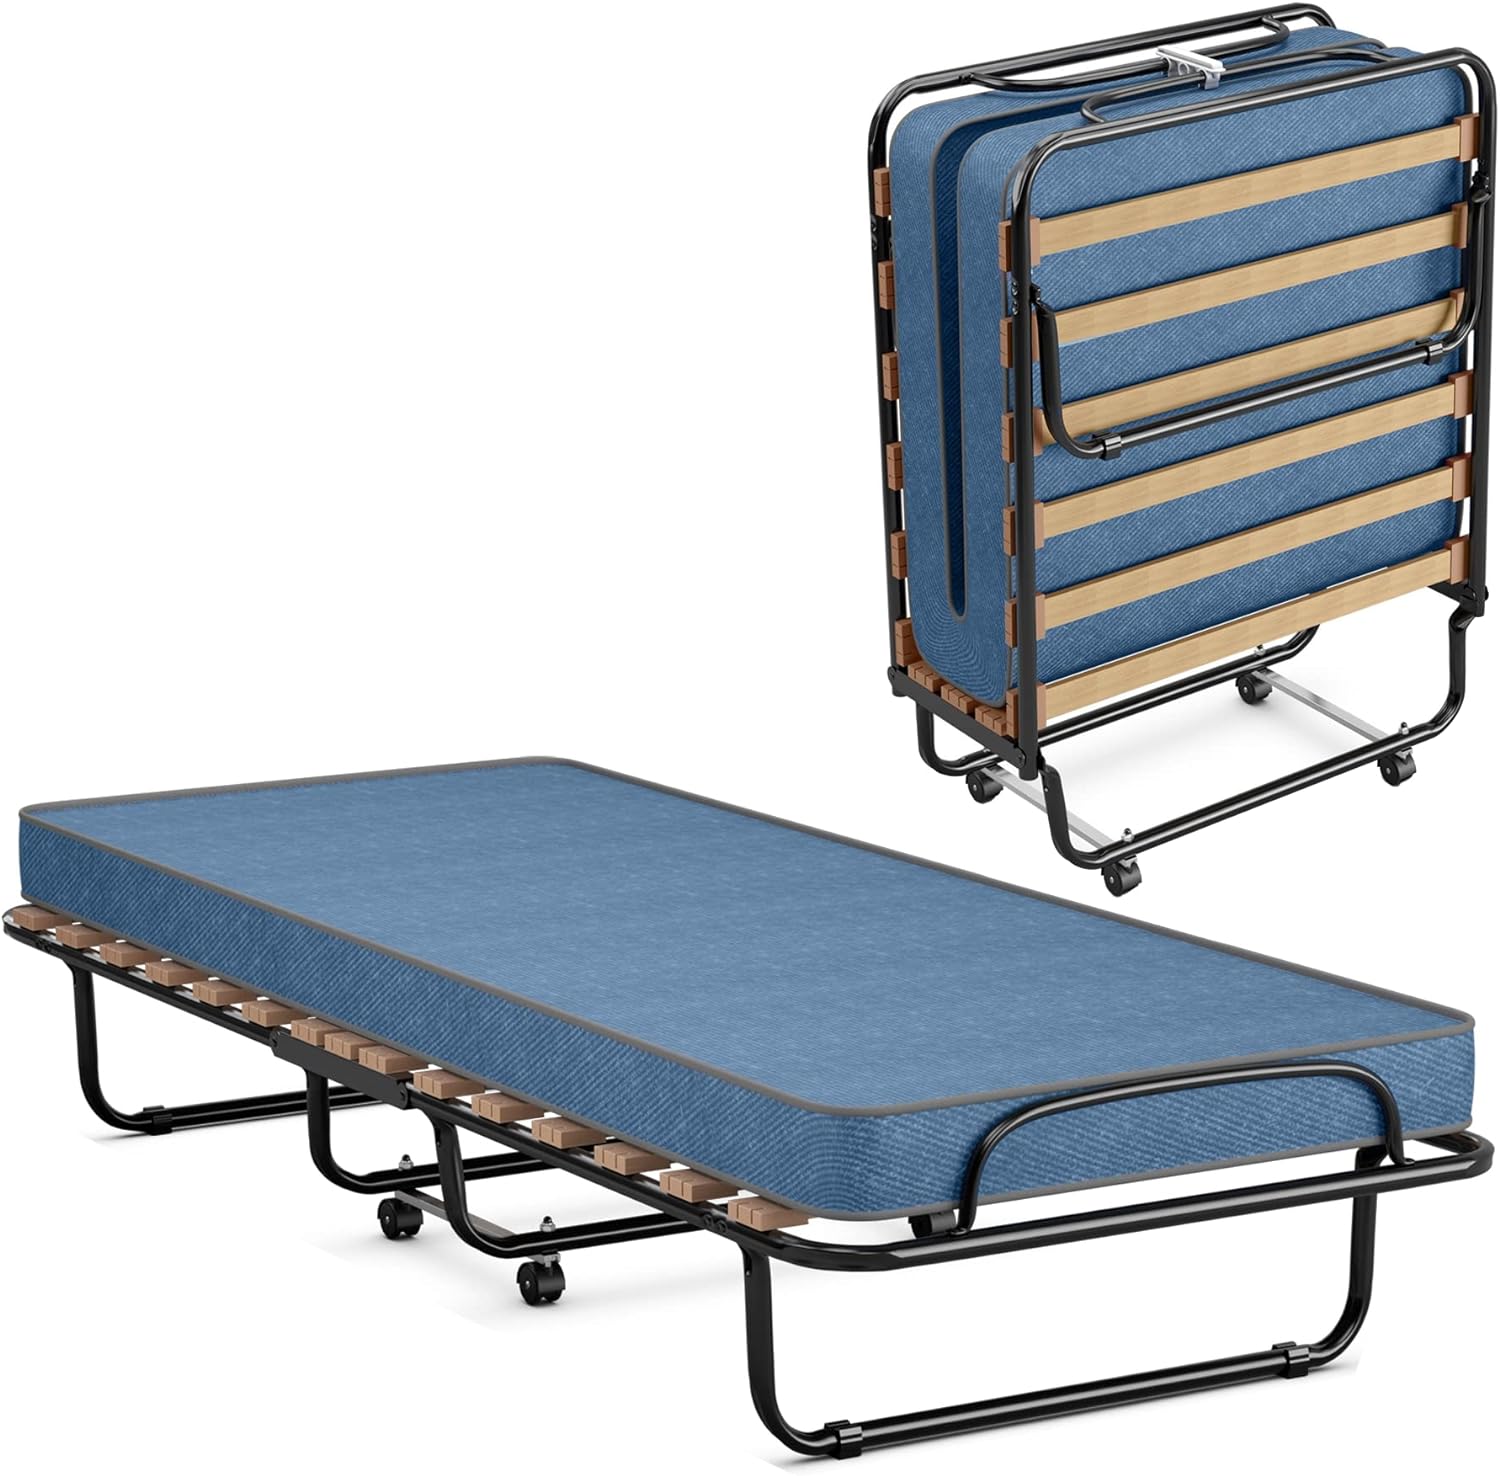 KOMFOTT Folding Rollaway Bed with Mattress, Foldable Bed with Memory Foam Mattress for Adults, Portable Fold Up Guest Bed with Sturdy Steel Frame on Wheels for Home & Office, Made in Italy (Navy Blue)